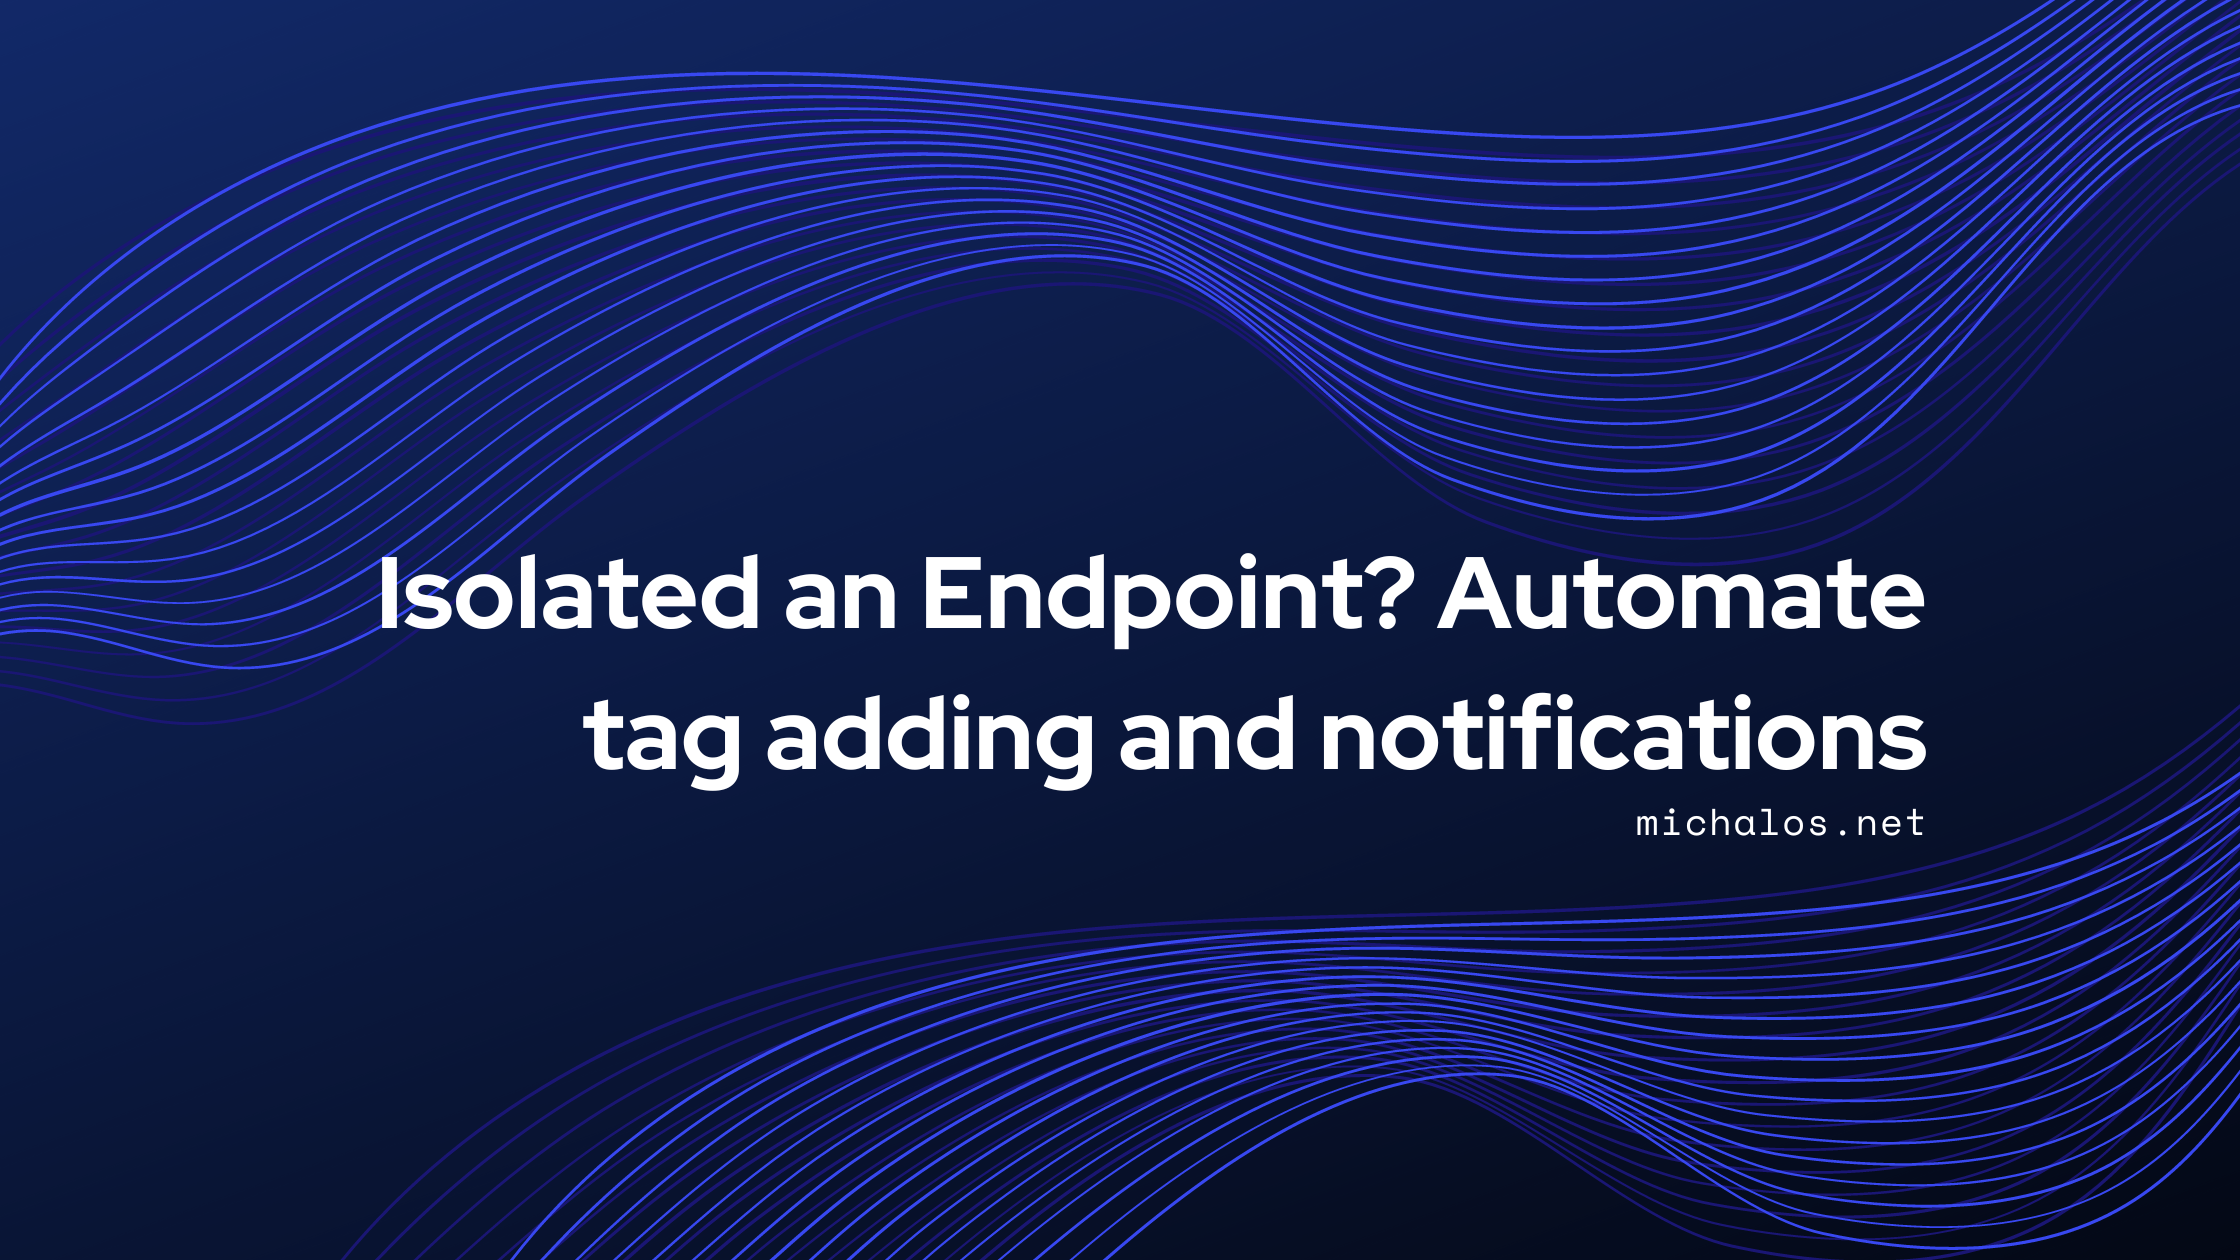 Isolated an Endpoint? Automate tag adding and notifications